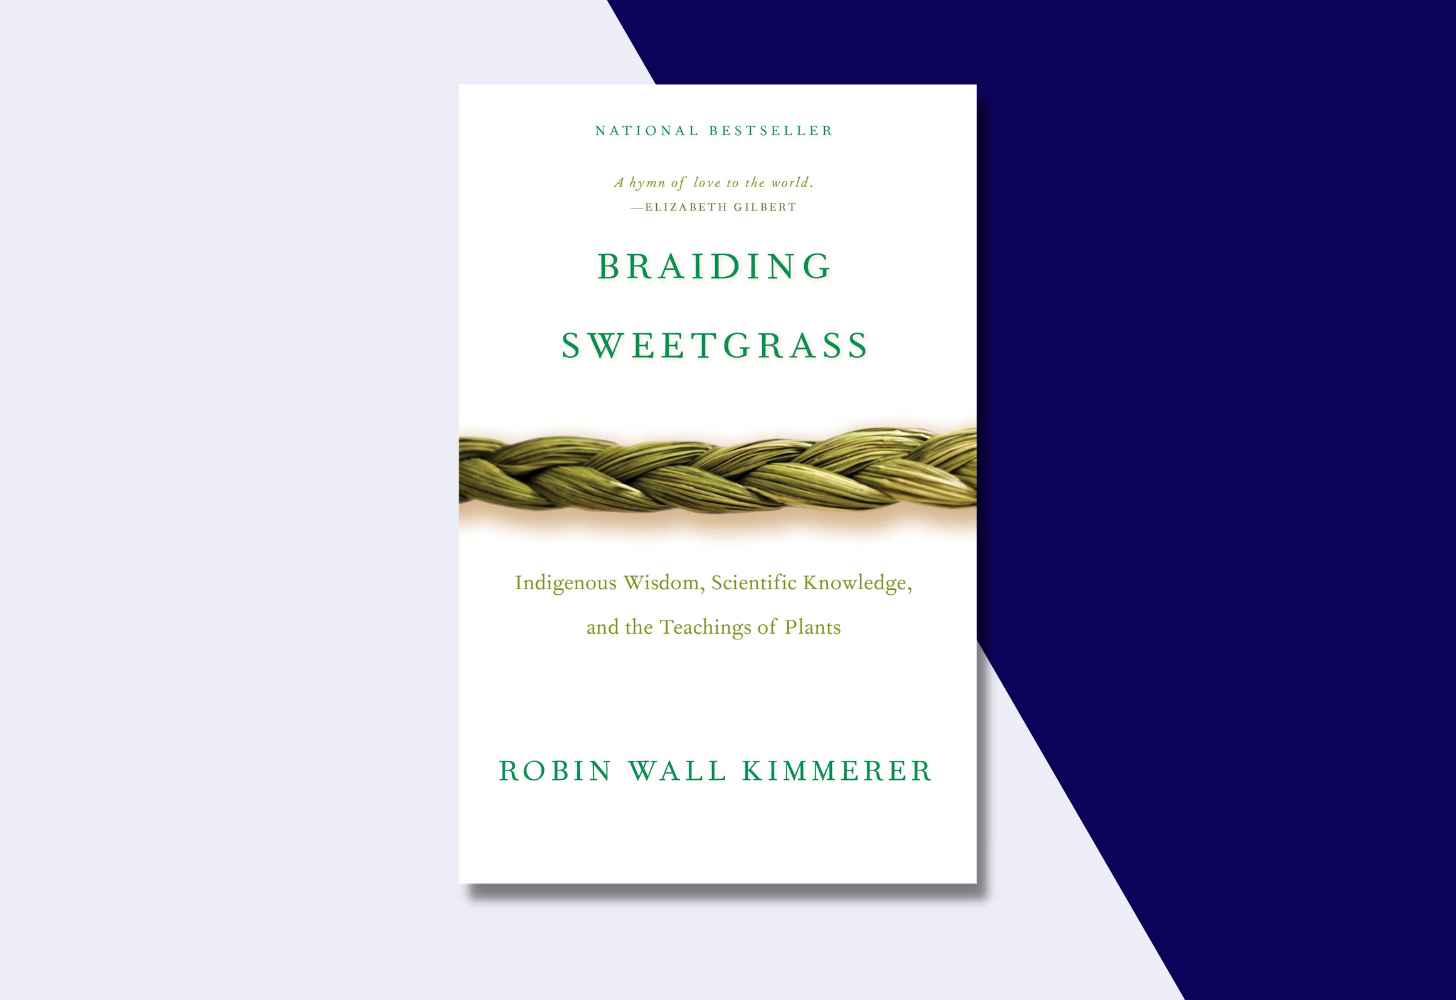 The Cover Of “Braiding Sweetgrass: Indigenous Wisdom, Scientific Knowledge and the Teachings of Plants” by Robin Wall Kimmerer